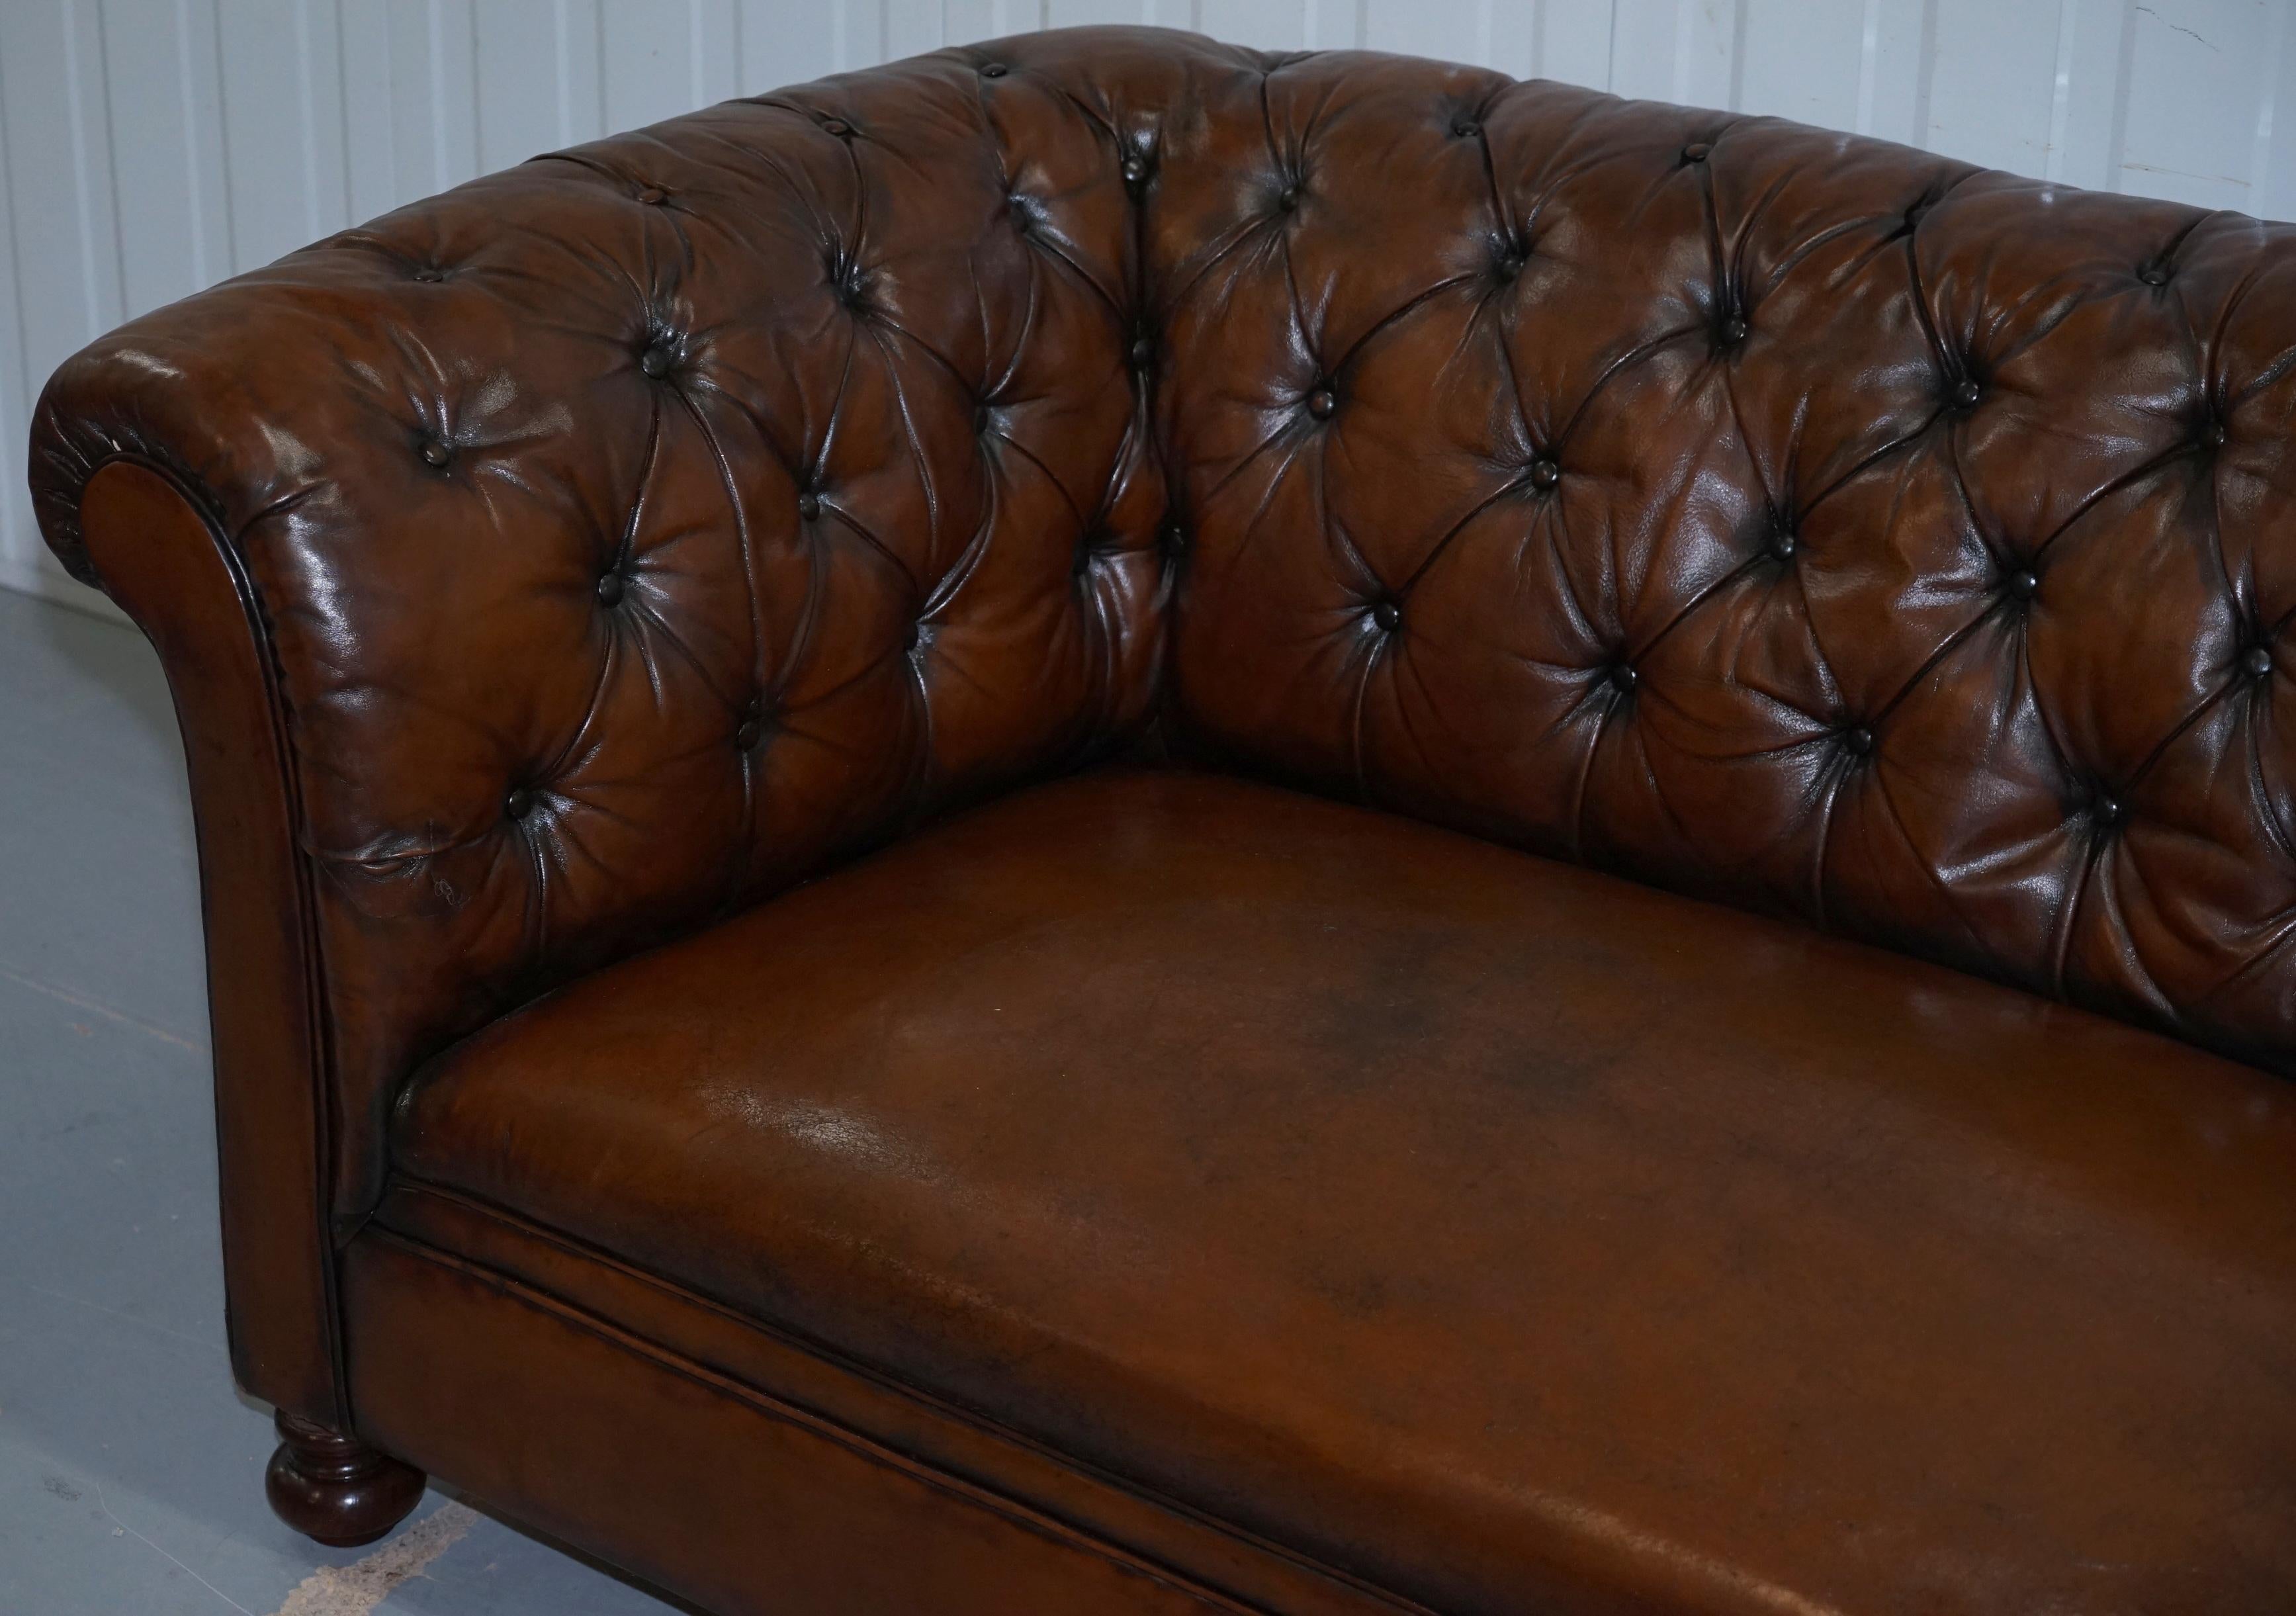 Hand-Crafted Restored Victorian Drop Arm Chesterfield Buttoned Hand Dyed Brown Leather Sofa